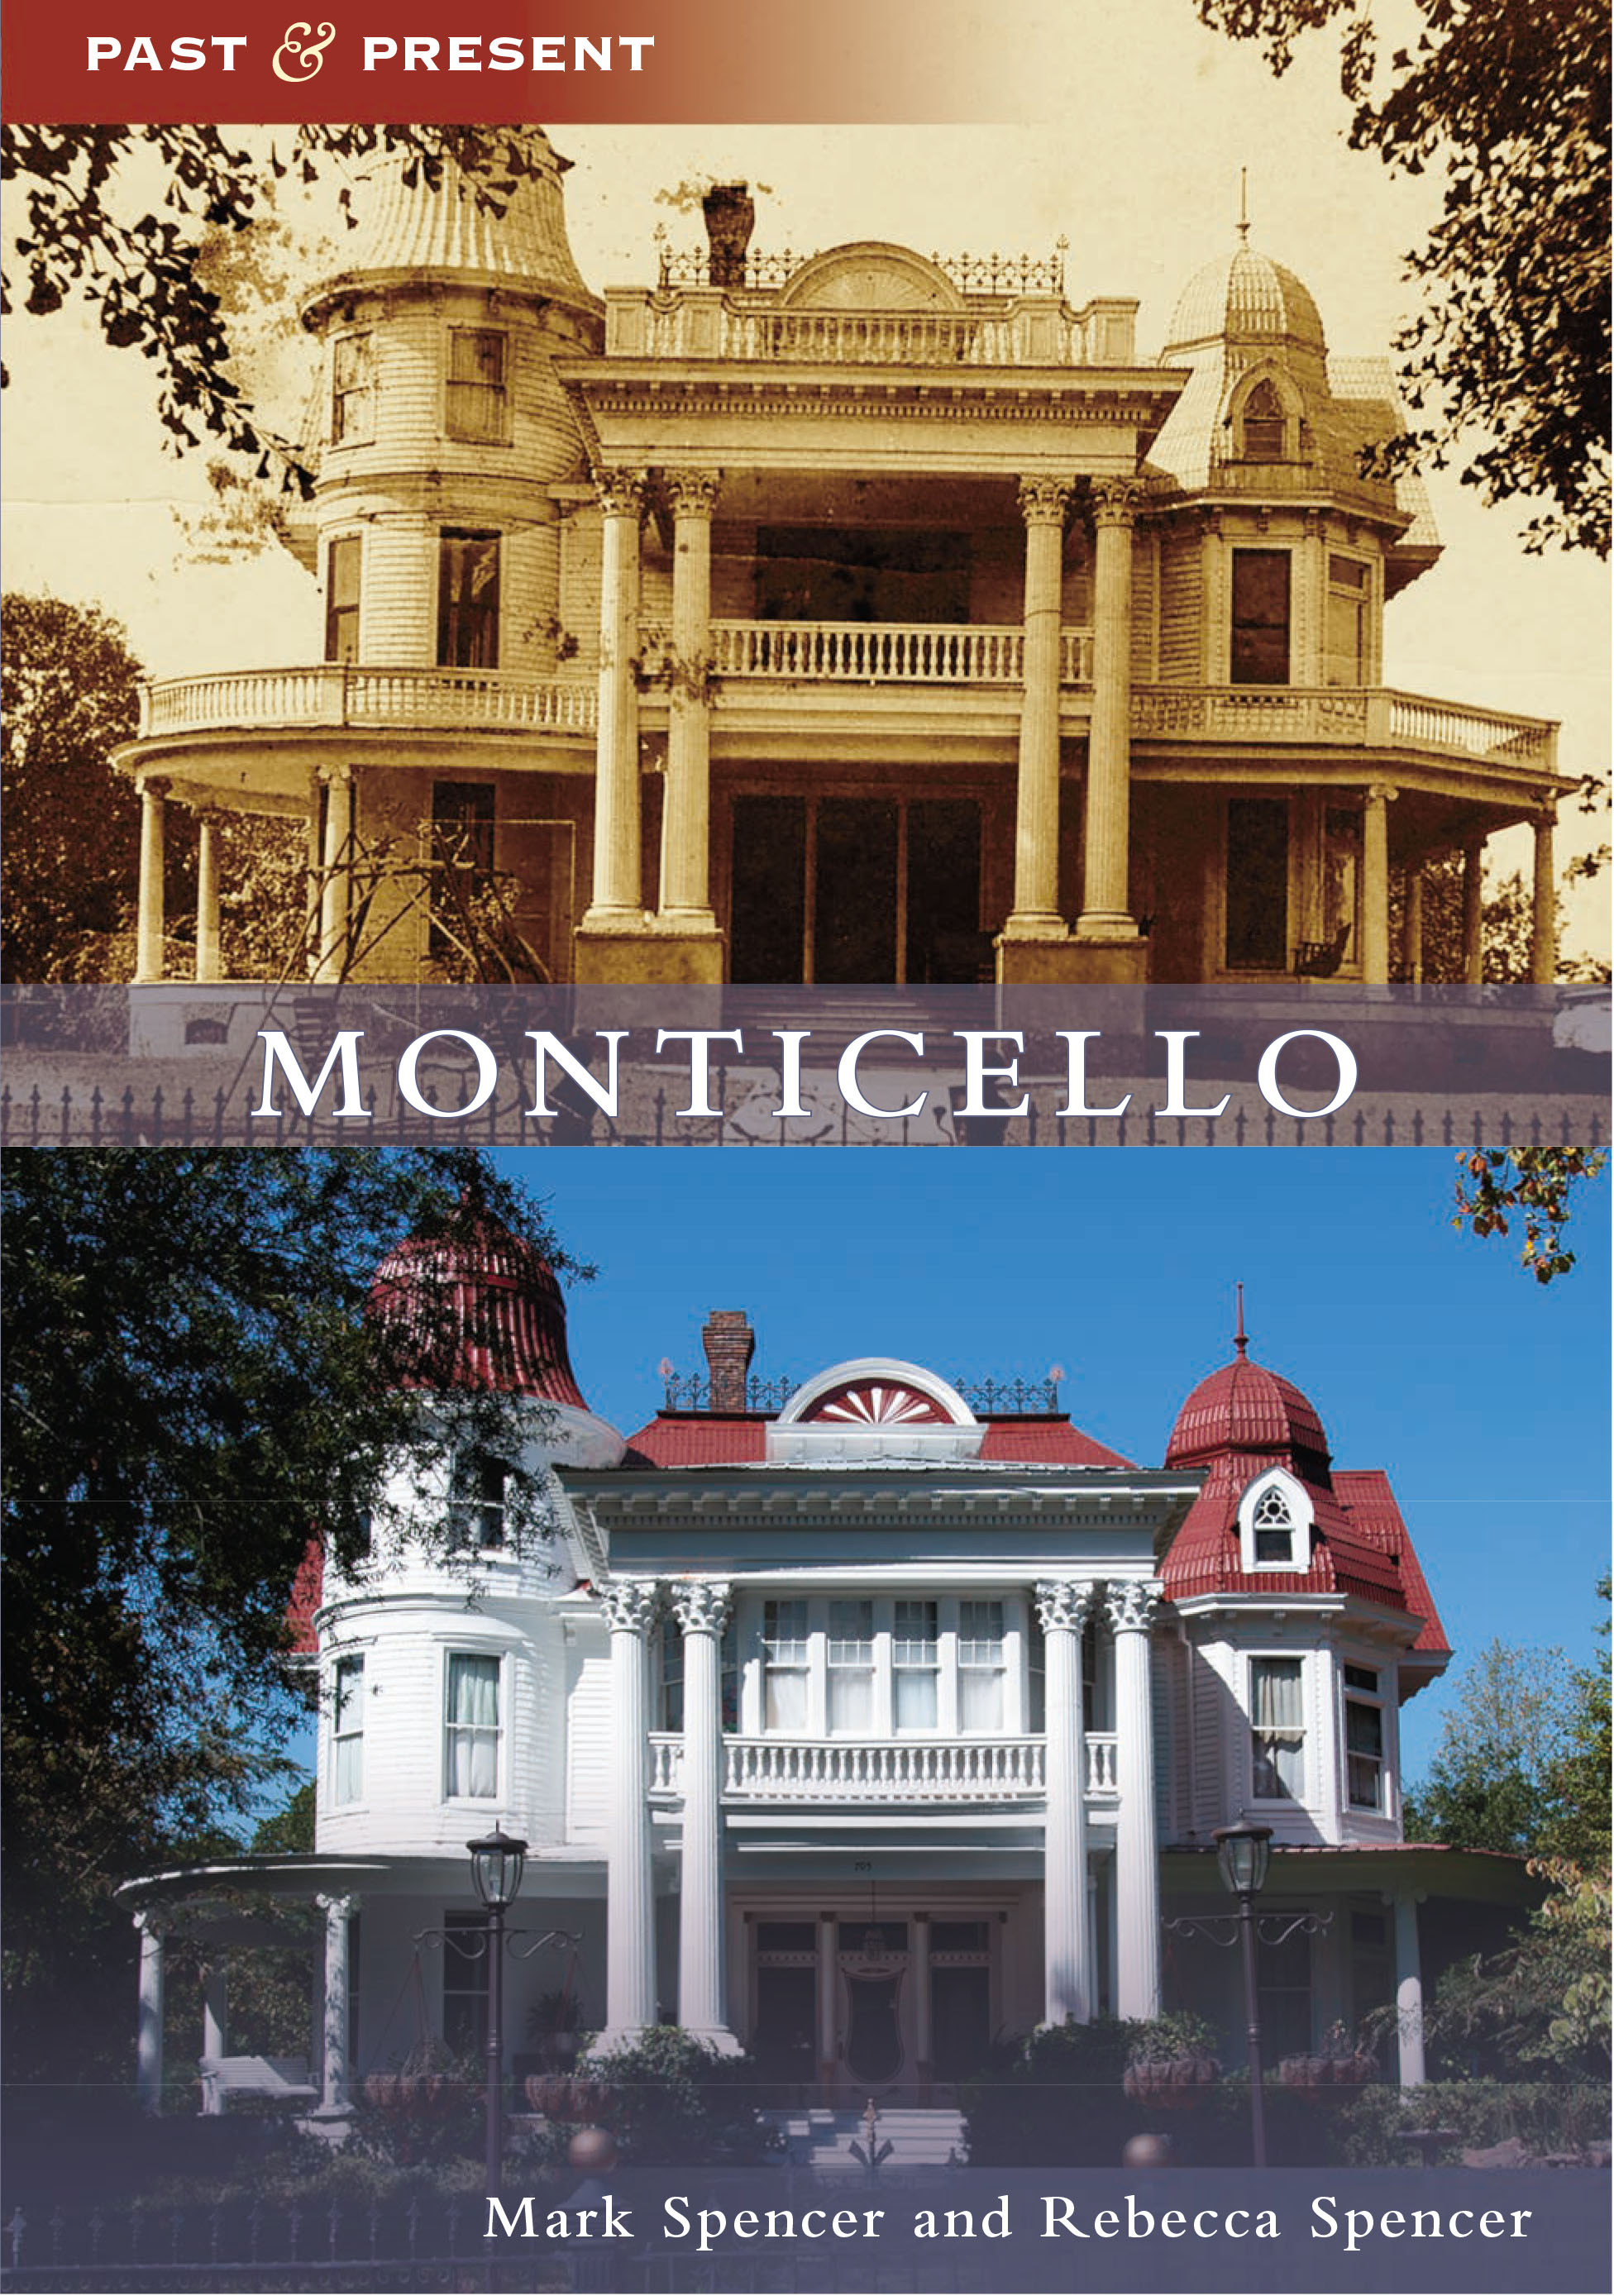 Monticello Book Cover by Spencer